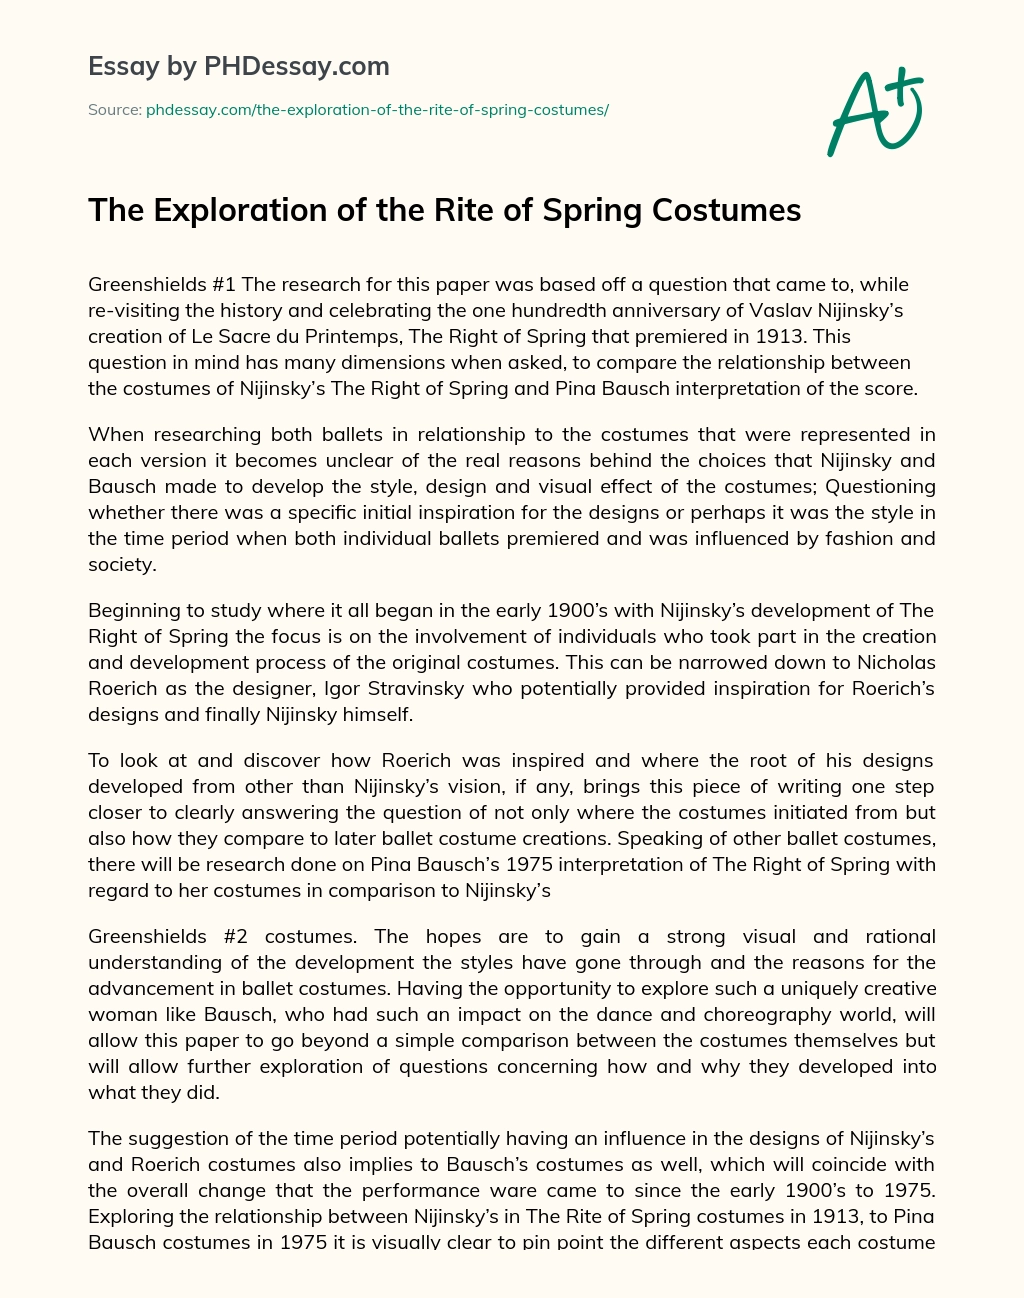 The Exploration of the Rite of Spring Costumes essay